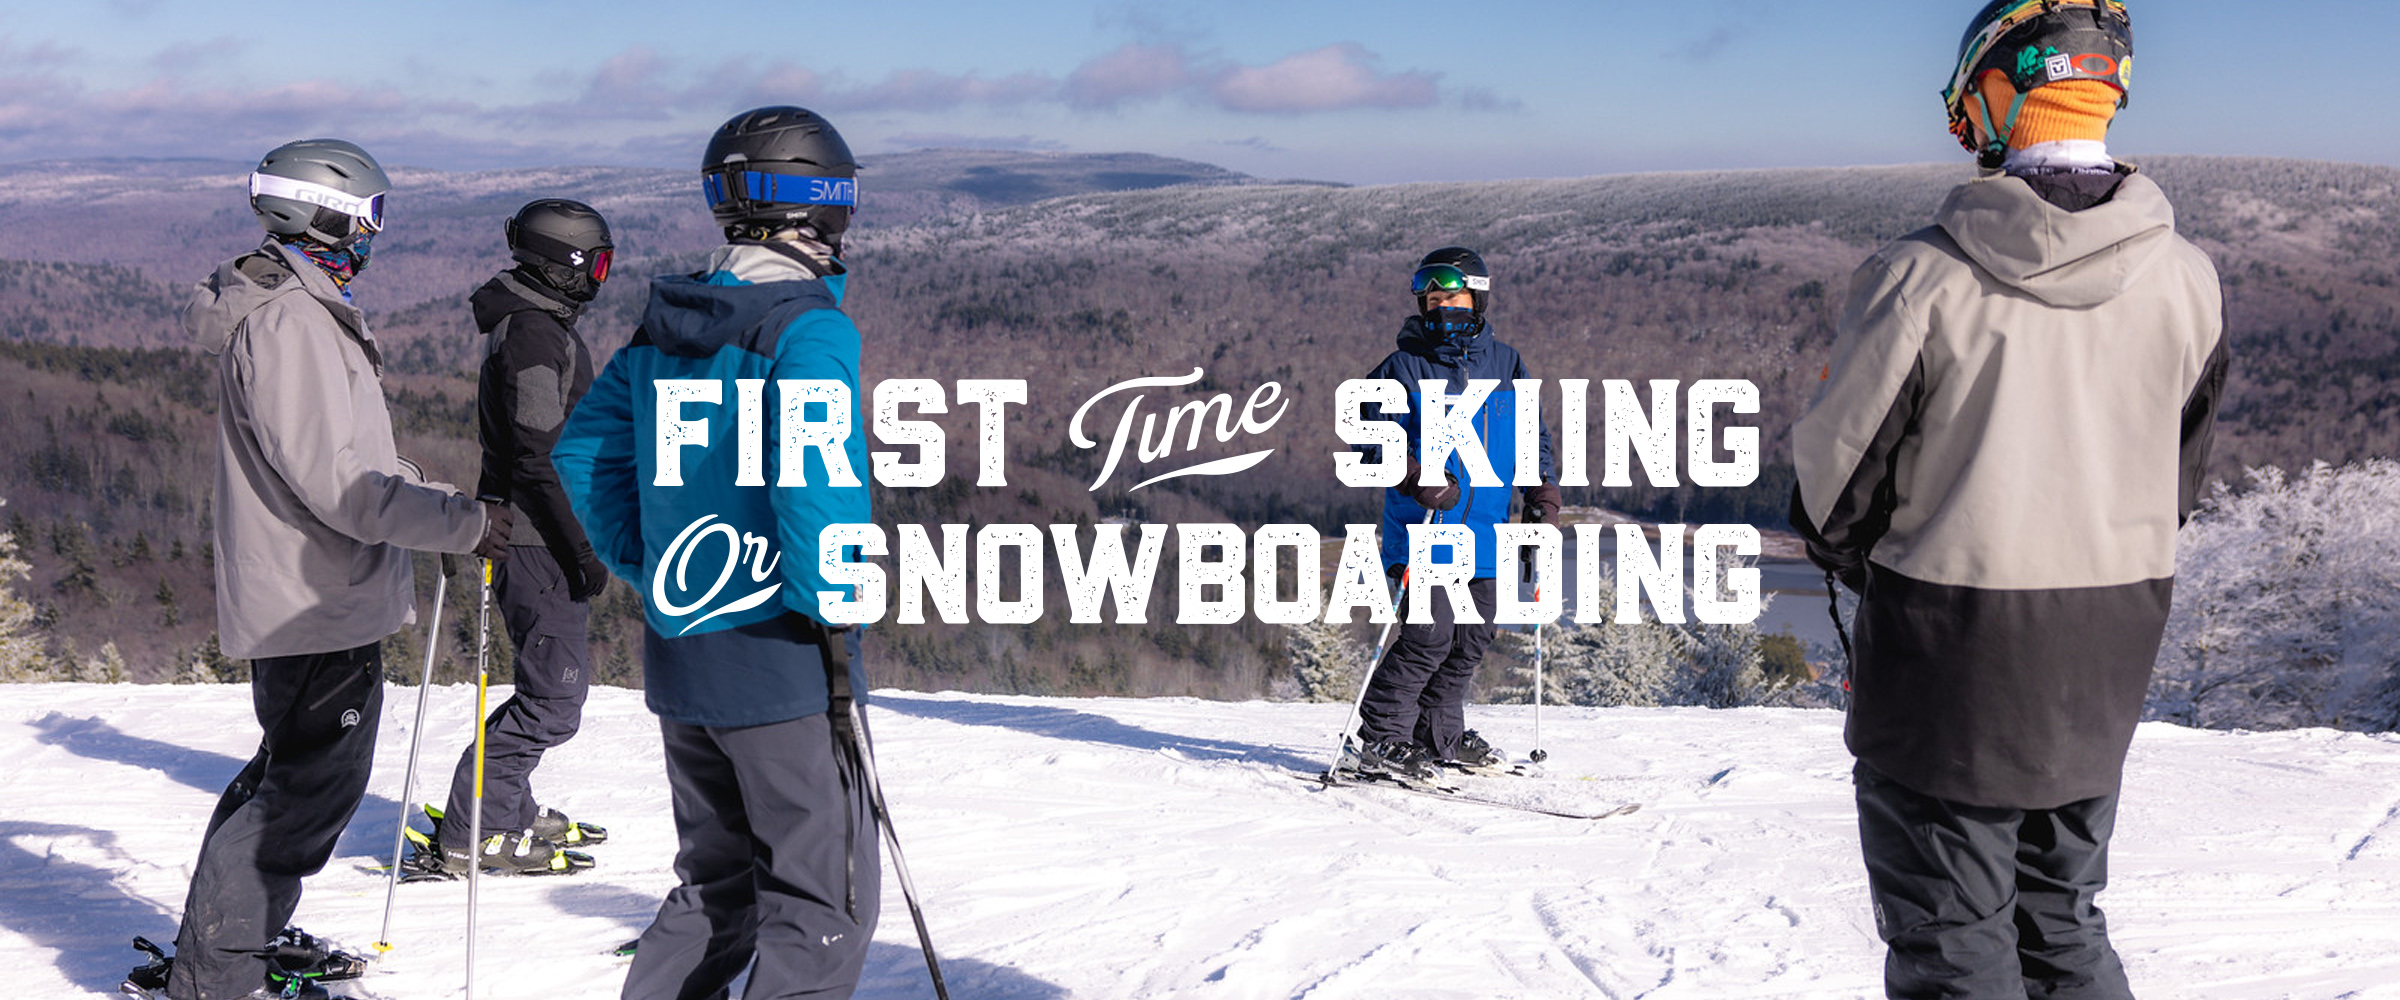 First Time Skiing or Snowboarding